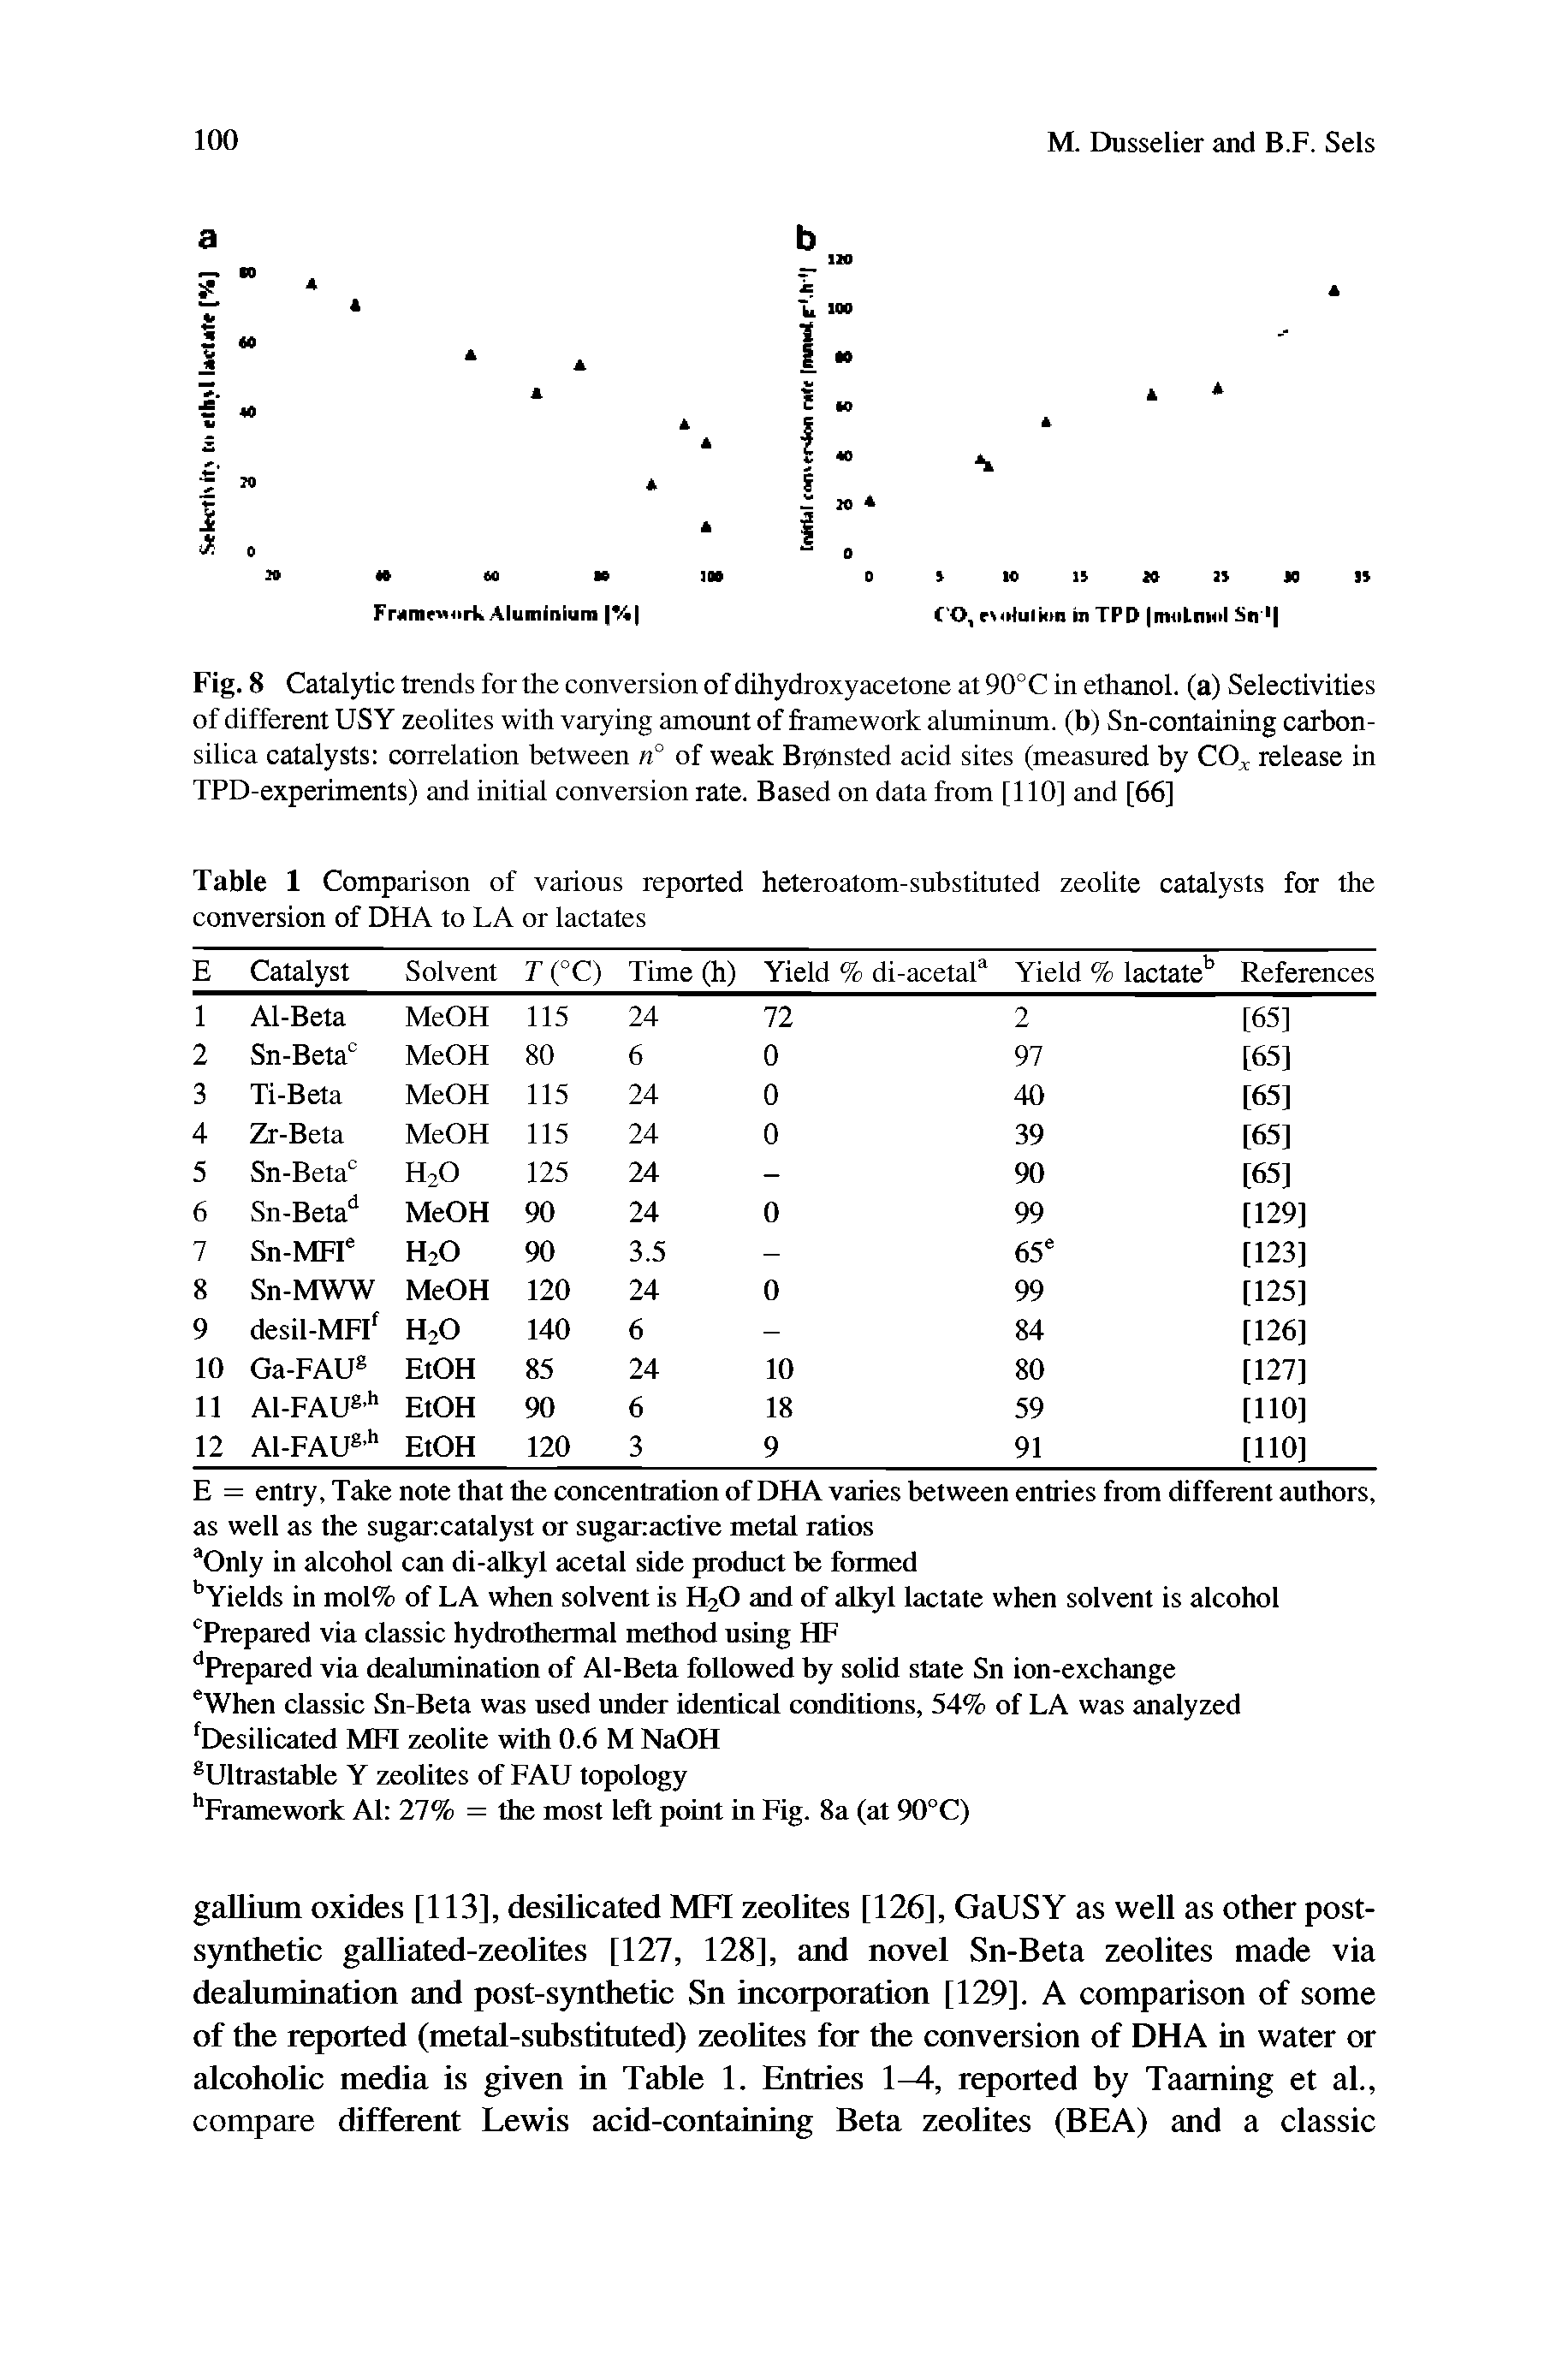 Table 1 Comparison of various reported heteroatom-substituted zeolite catalysts for the conversion of DHA to LA or lactates...